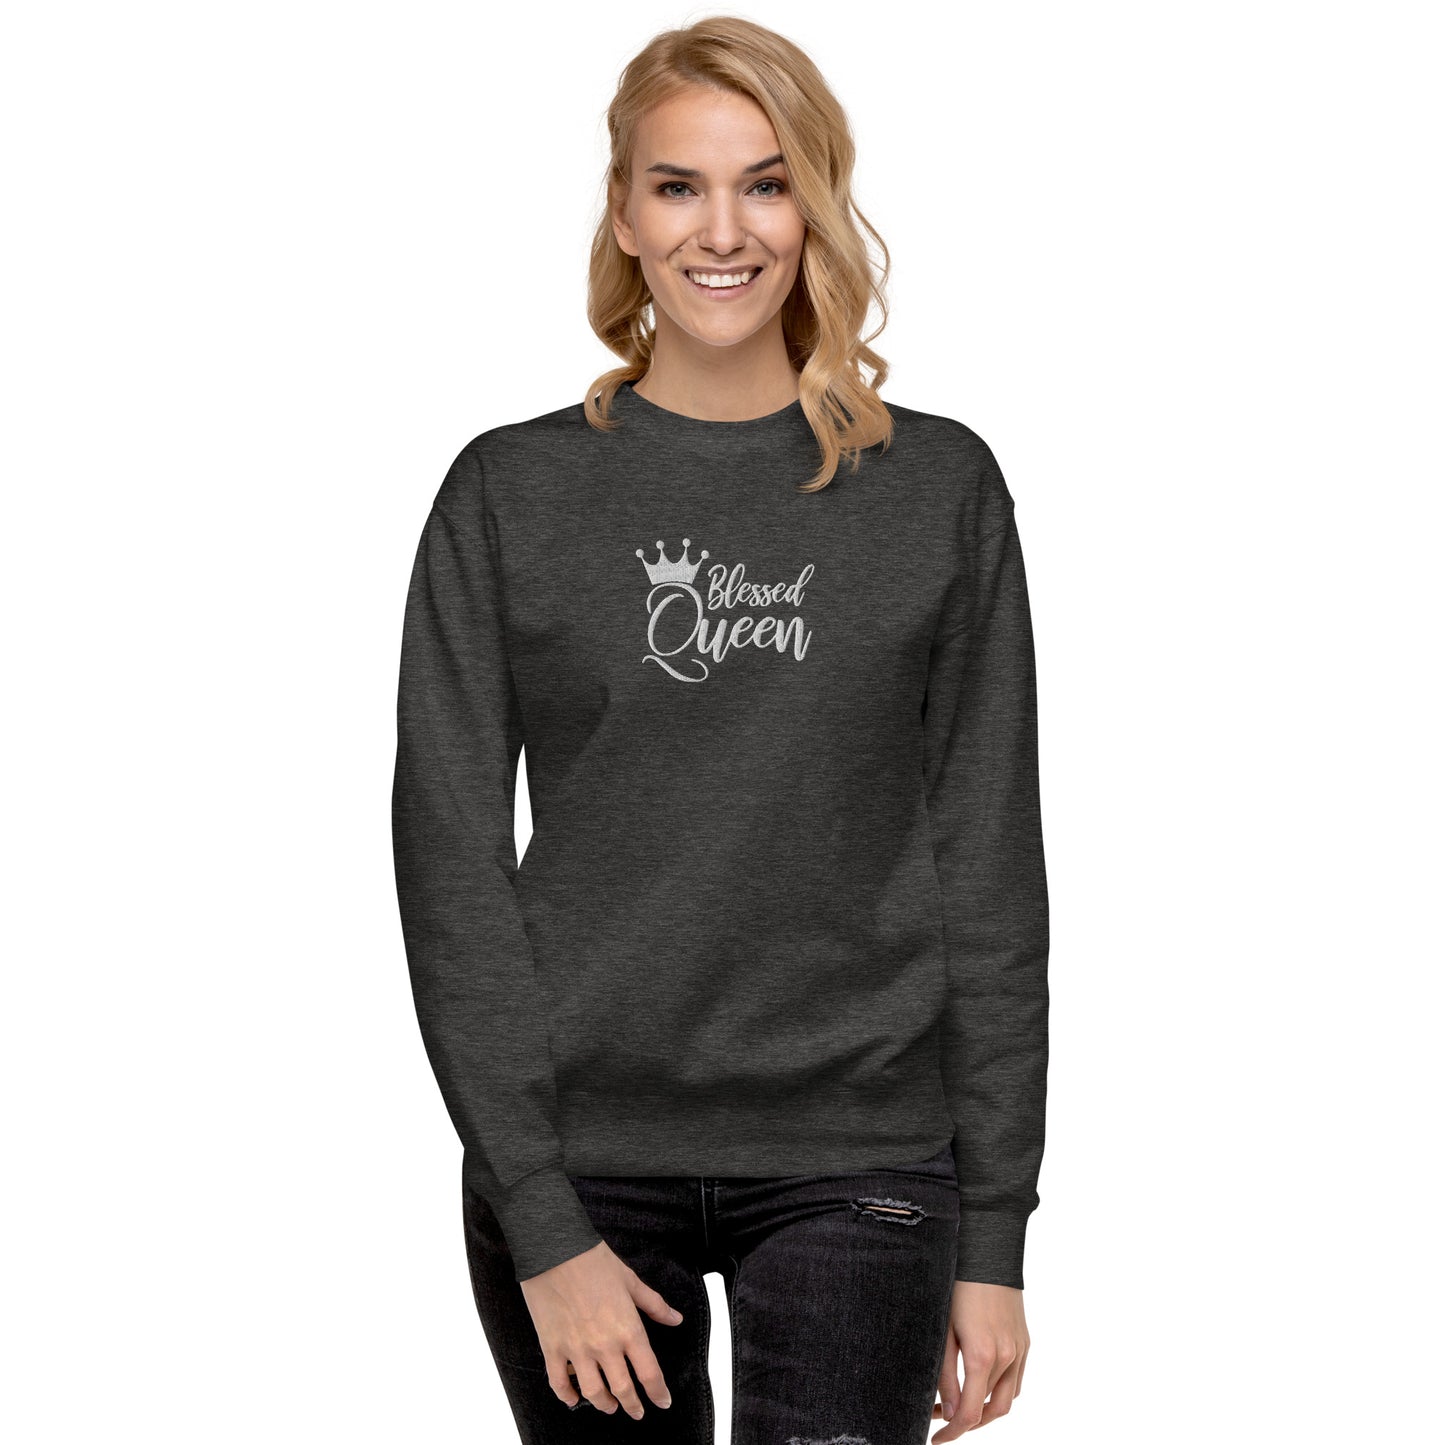 Blessed Queen Embroidered Sweatshirt